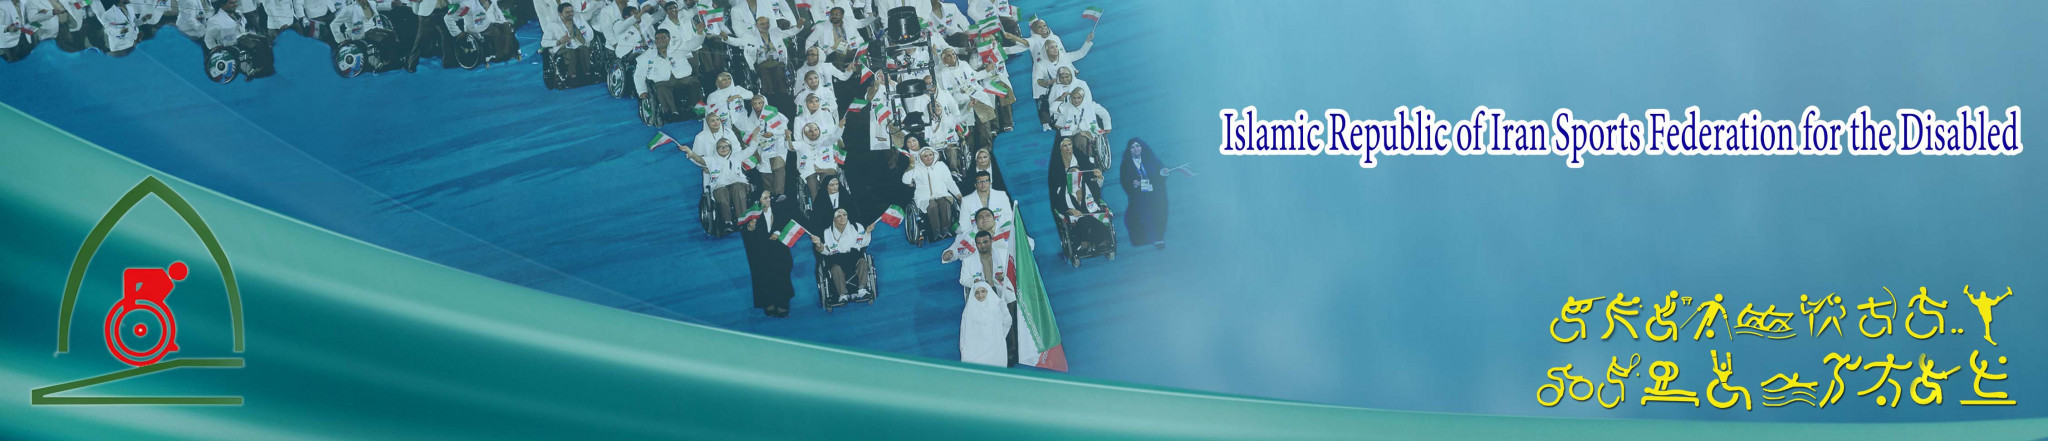 The Iran Sports Federation for the Disabled has confirmed a plan to form a women's powerlifting team ©IRISFD